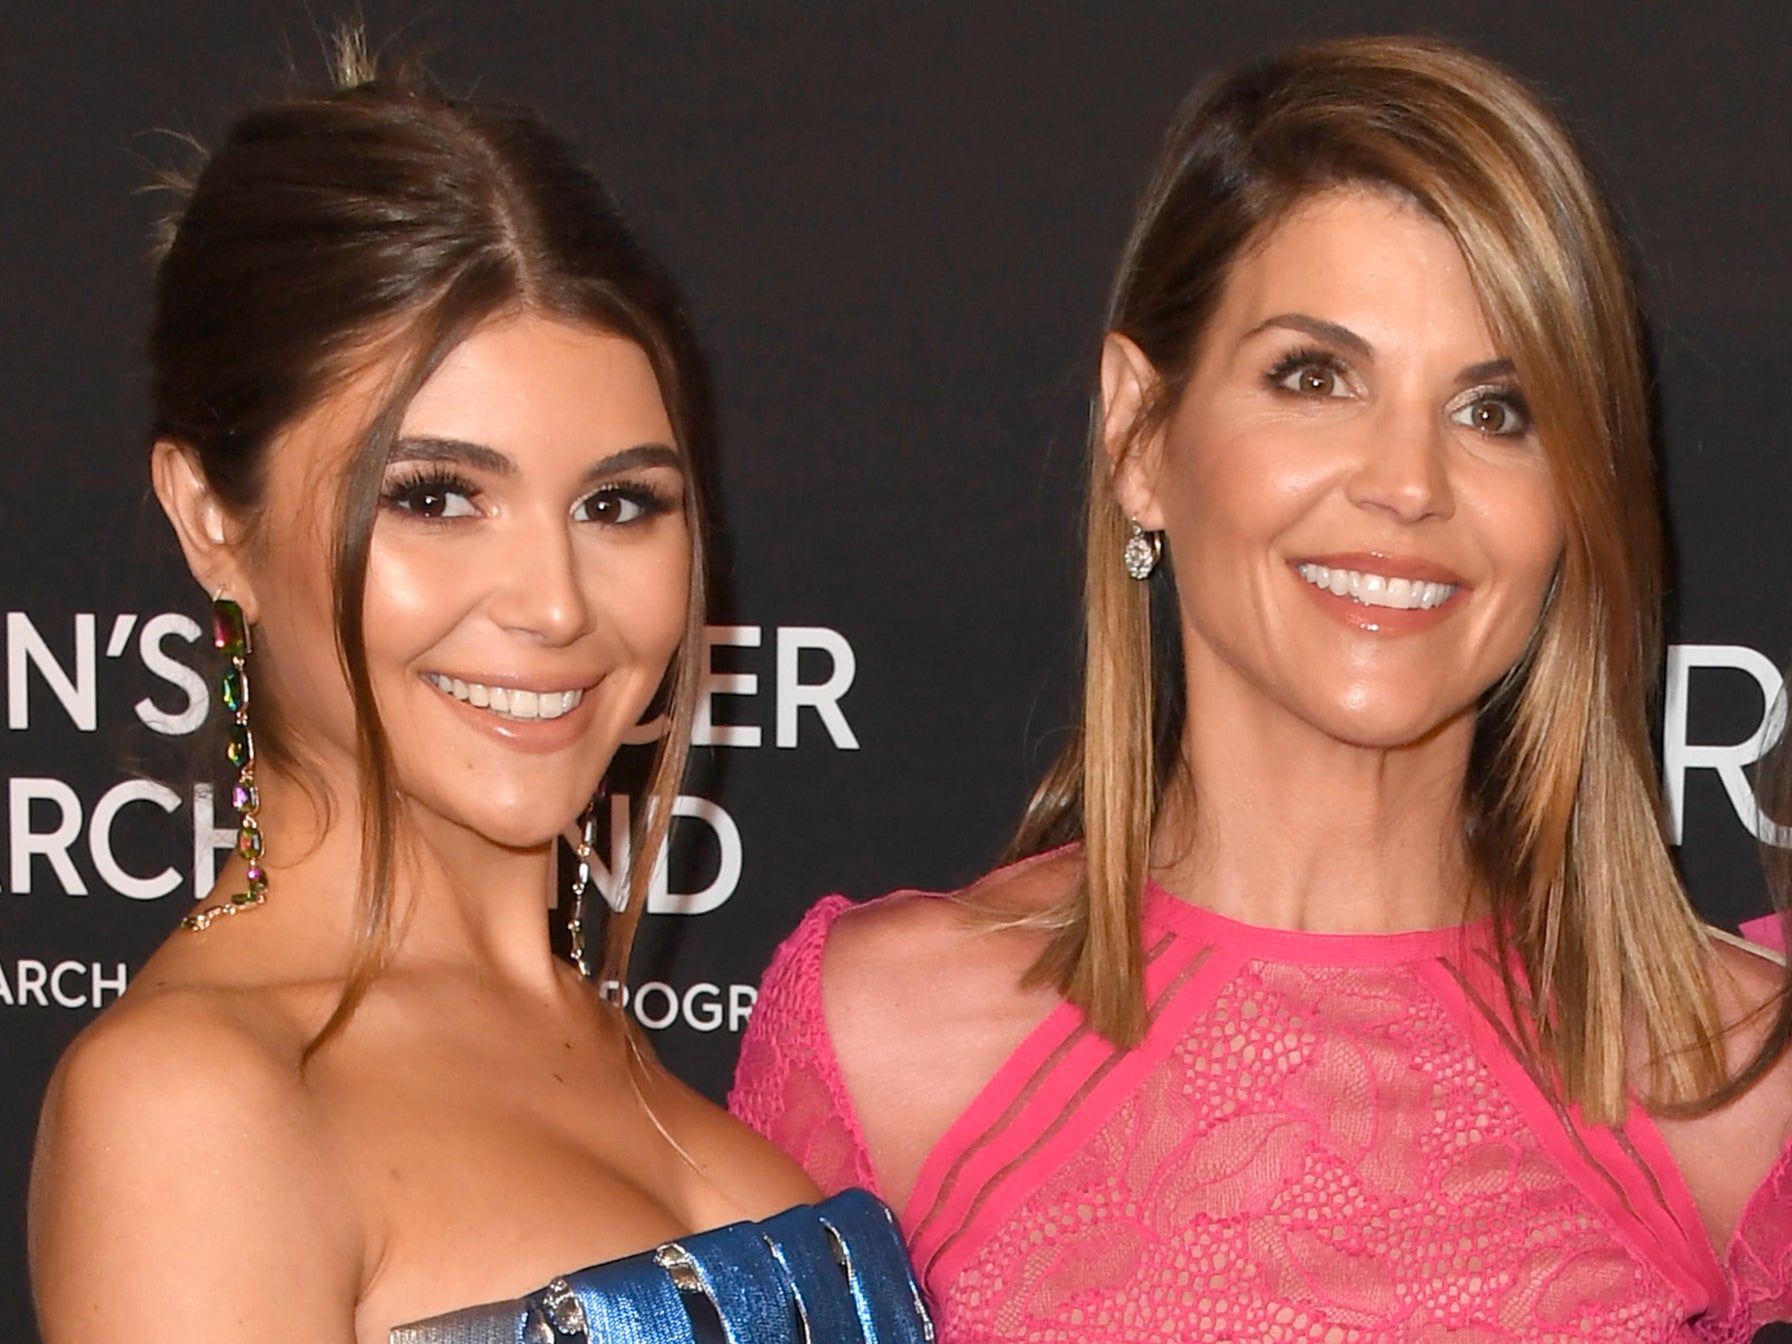 Olivia Jade and Lori Loughlin at an event on 28 February 2019 in Beverly Hills, California